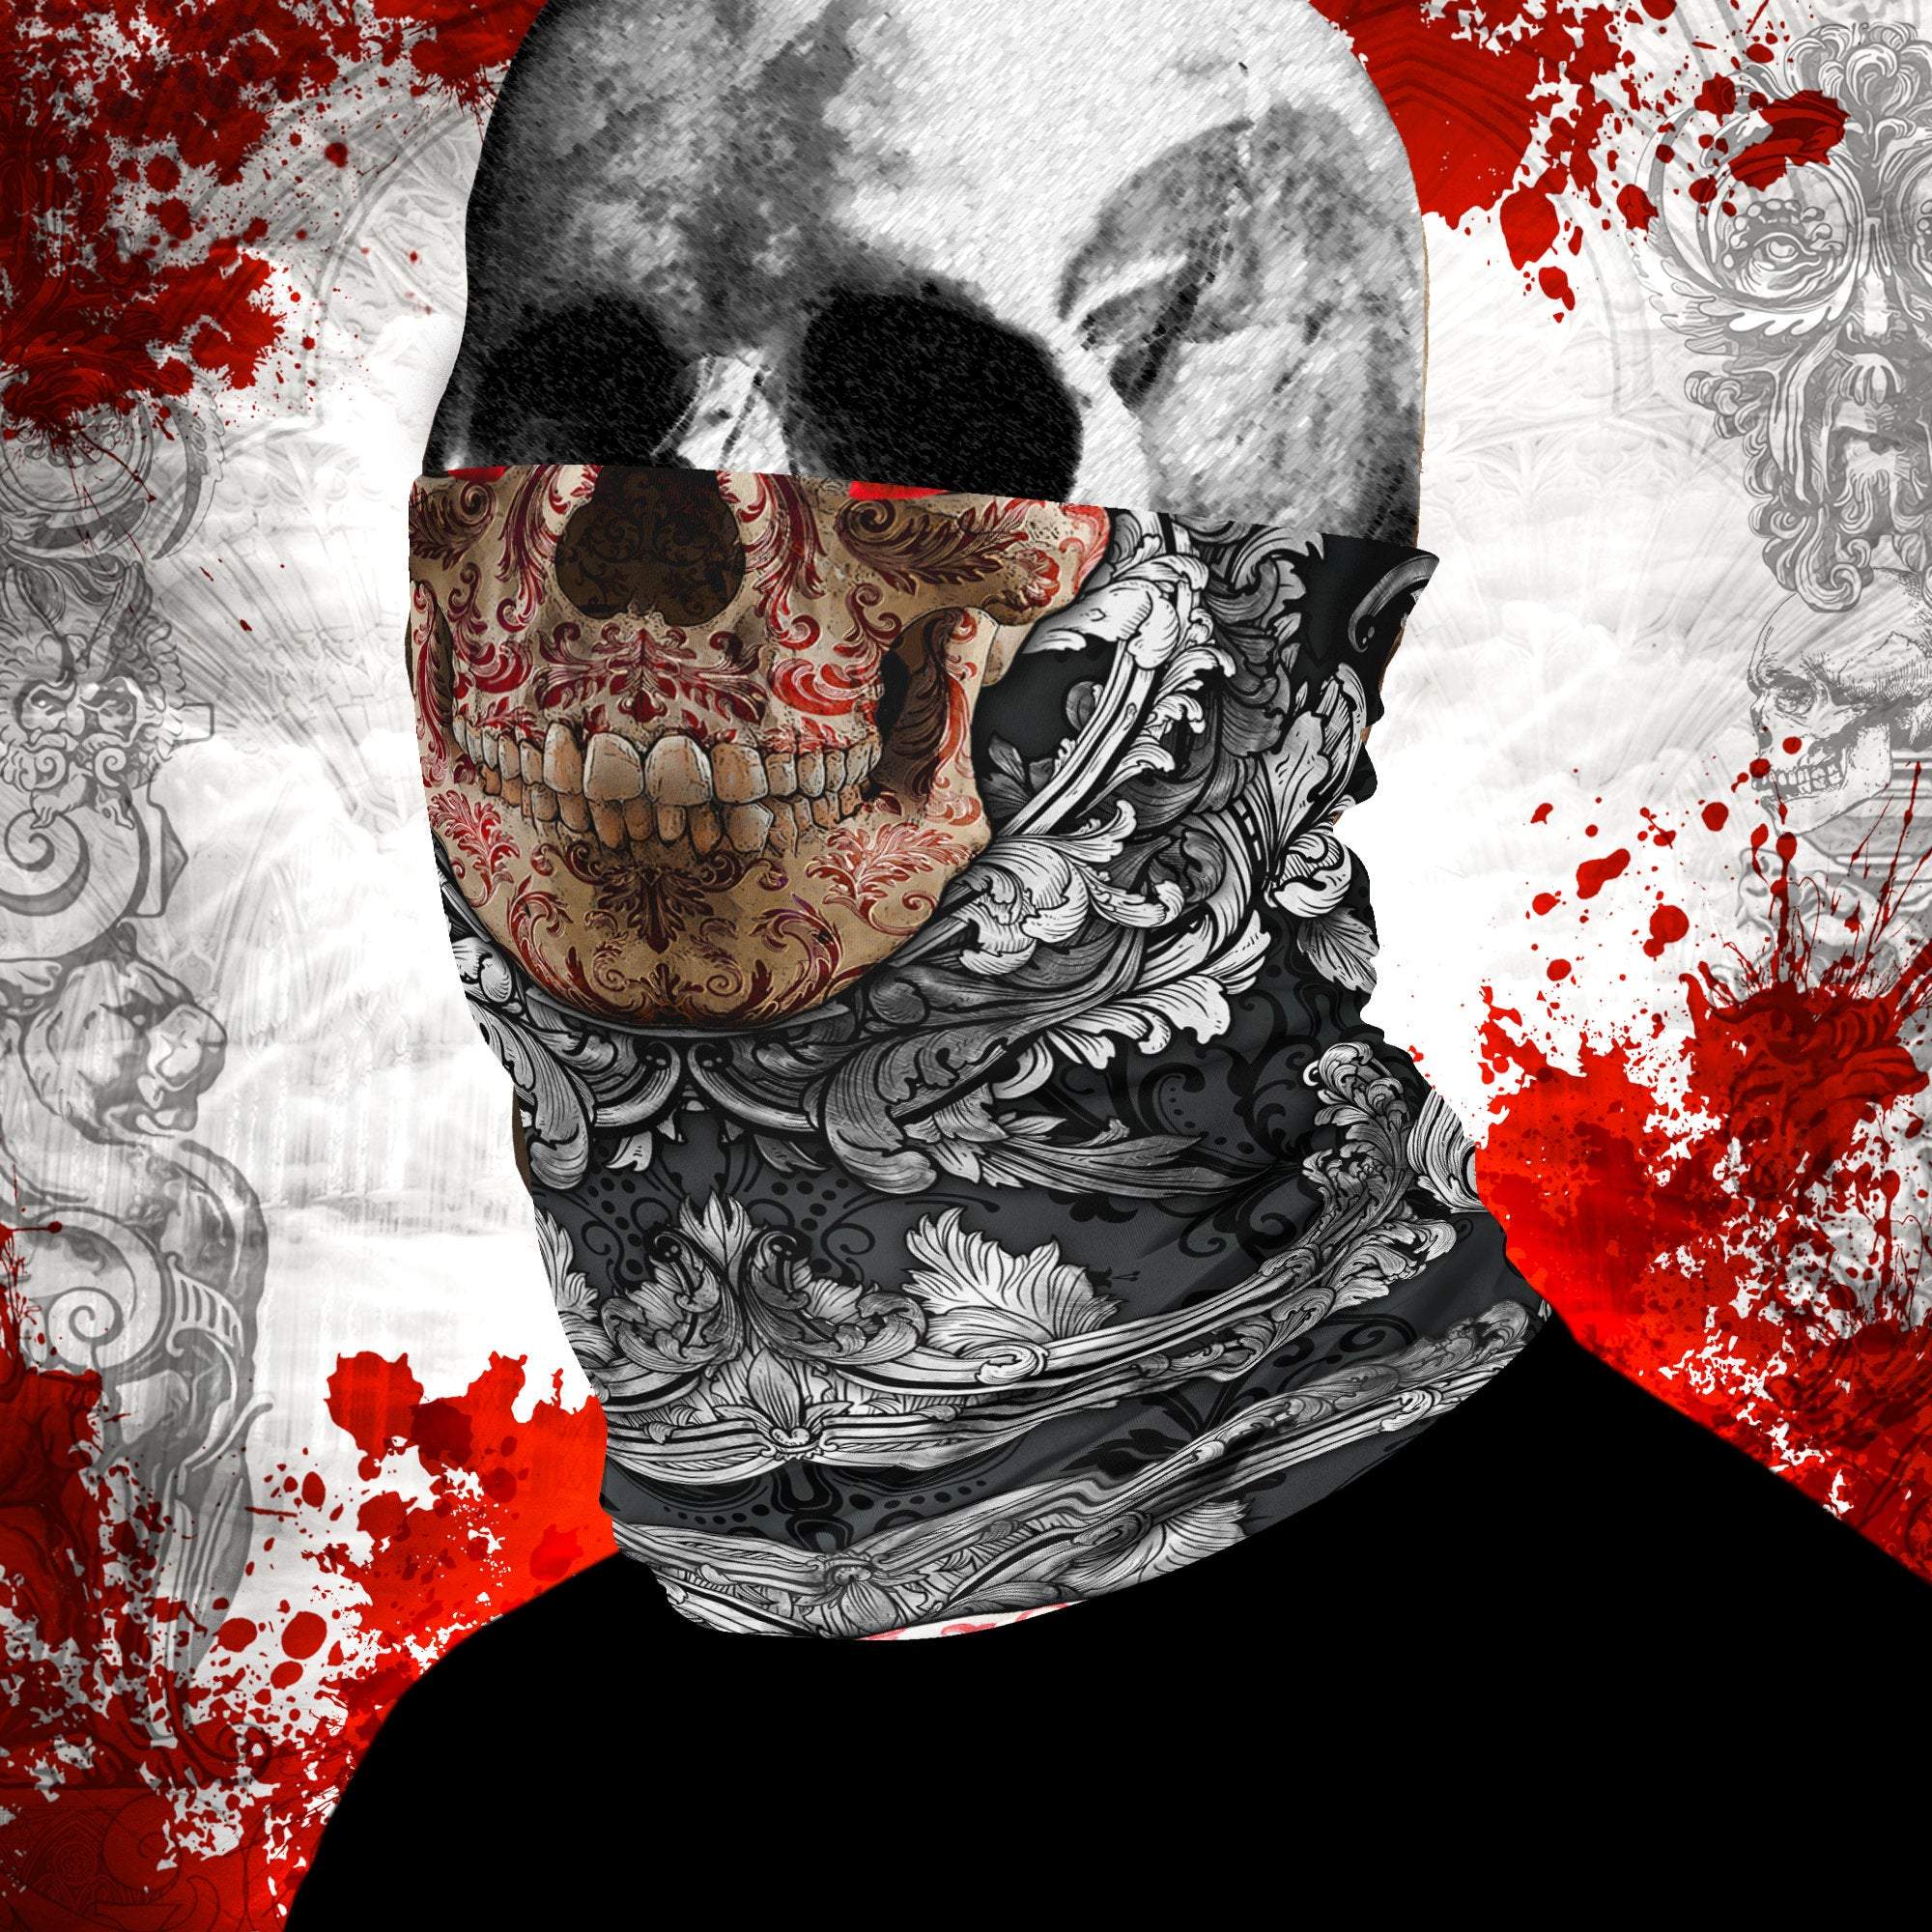 Skull Neck Gaiter, Face Mask, Head Covering, Gothic Street Outfit - Silver & Red - Abysm Internal